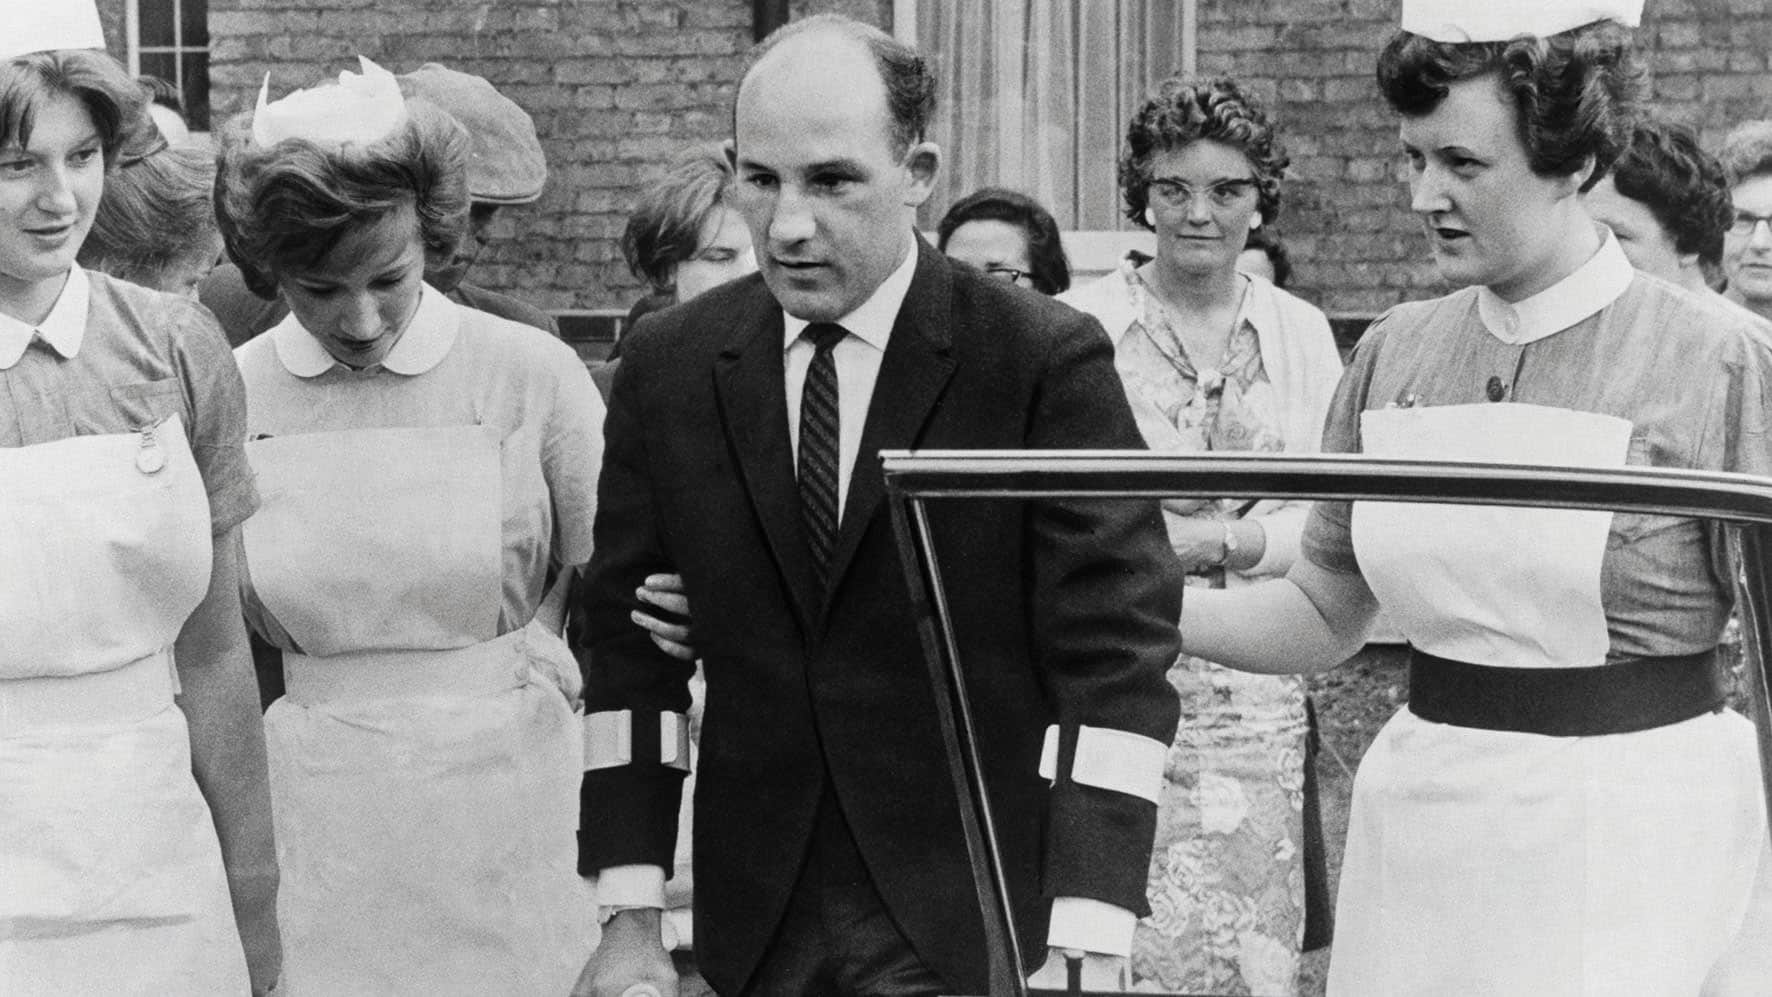 Stirling Moss on crutches